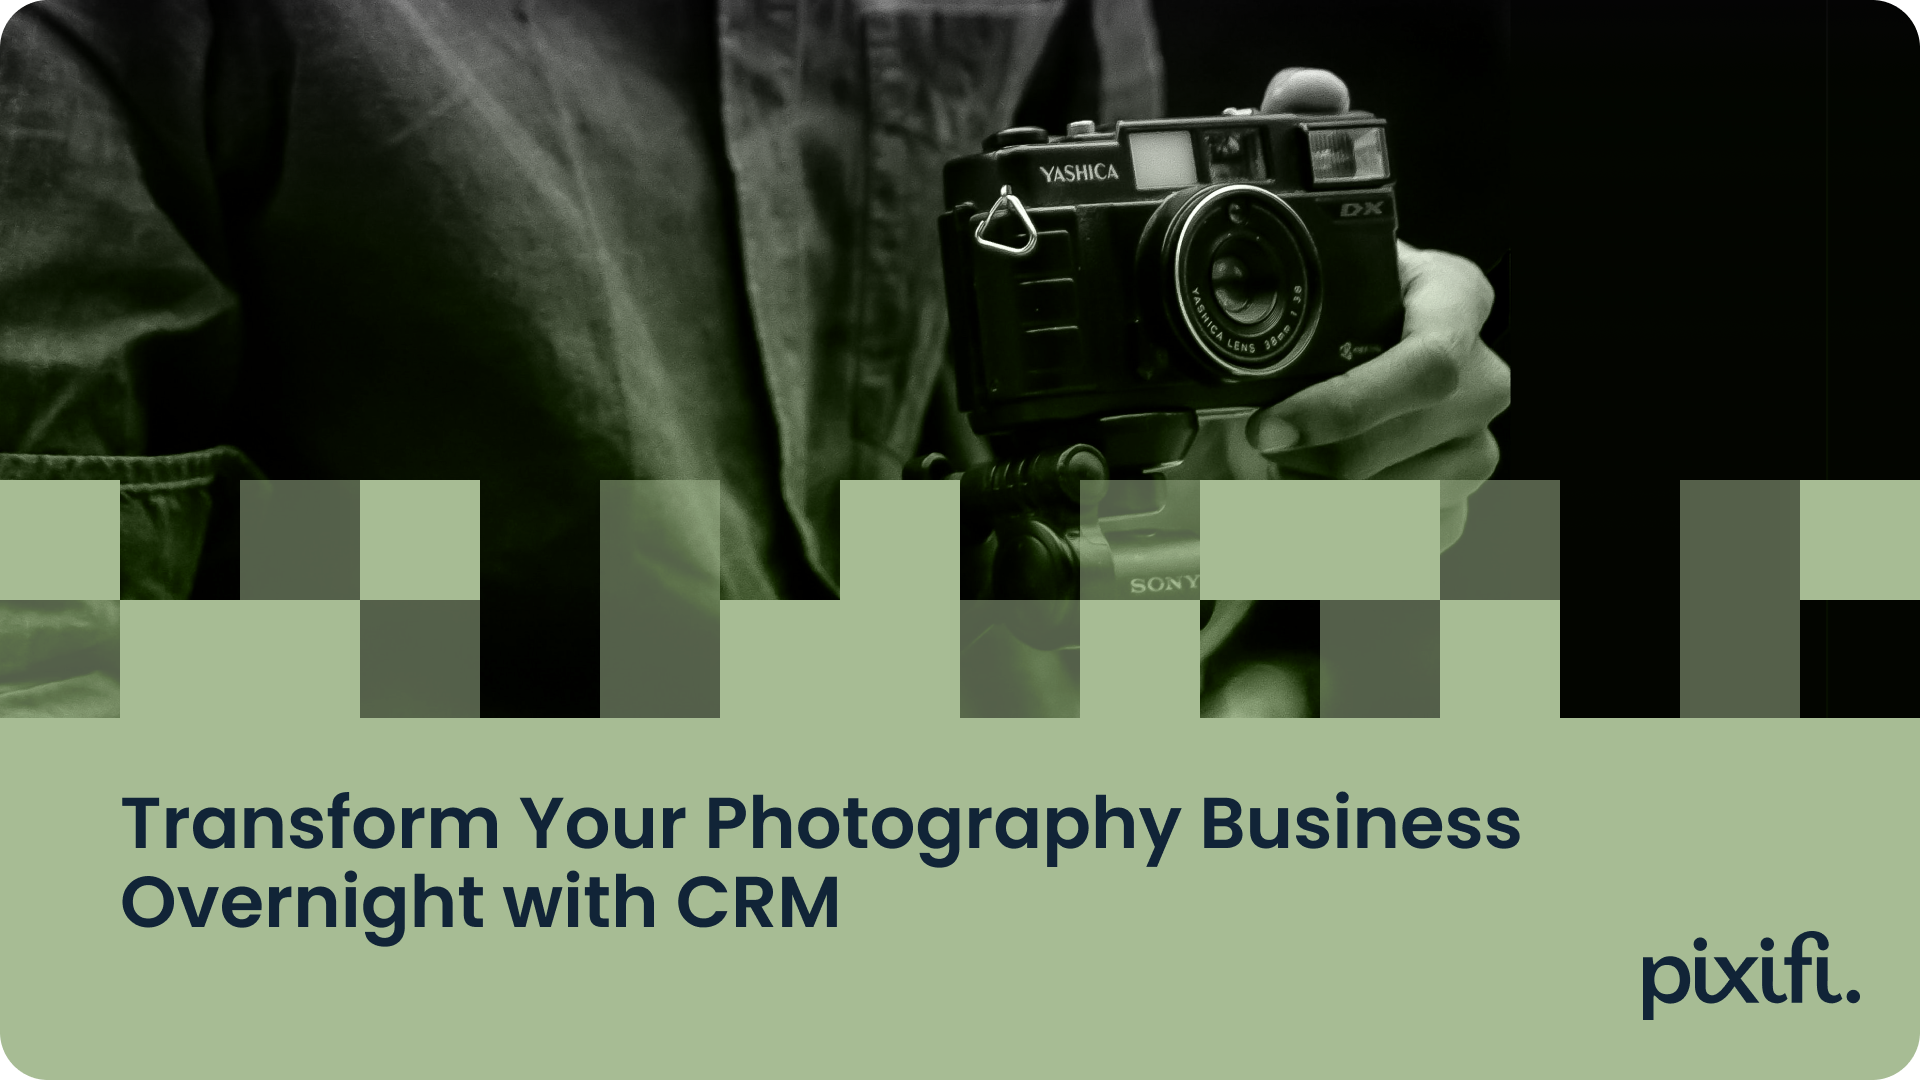 Transform Your Photography Business Overnight with CRM